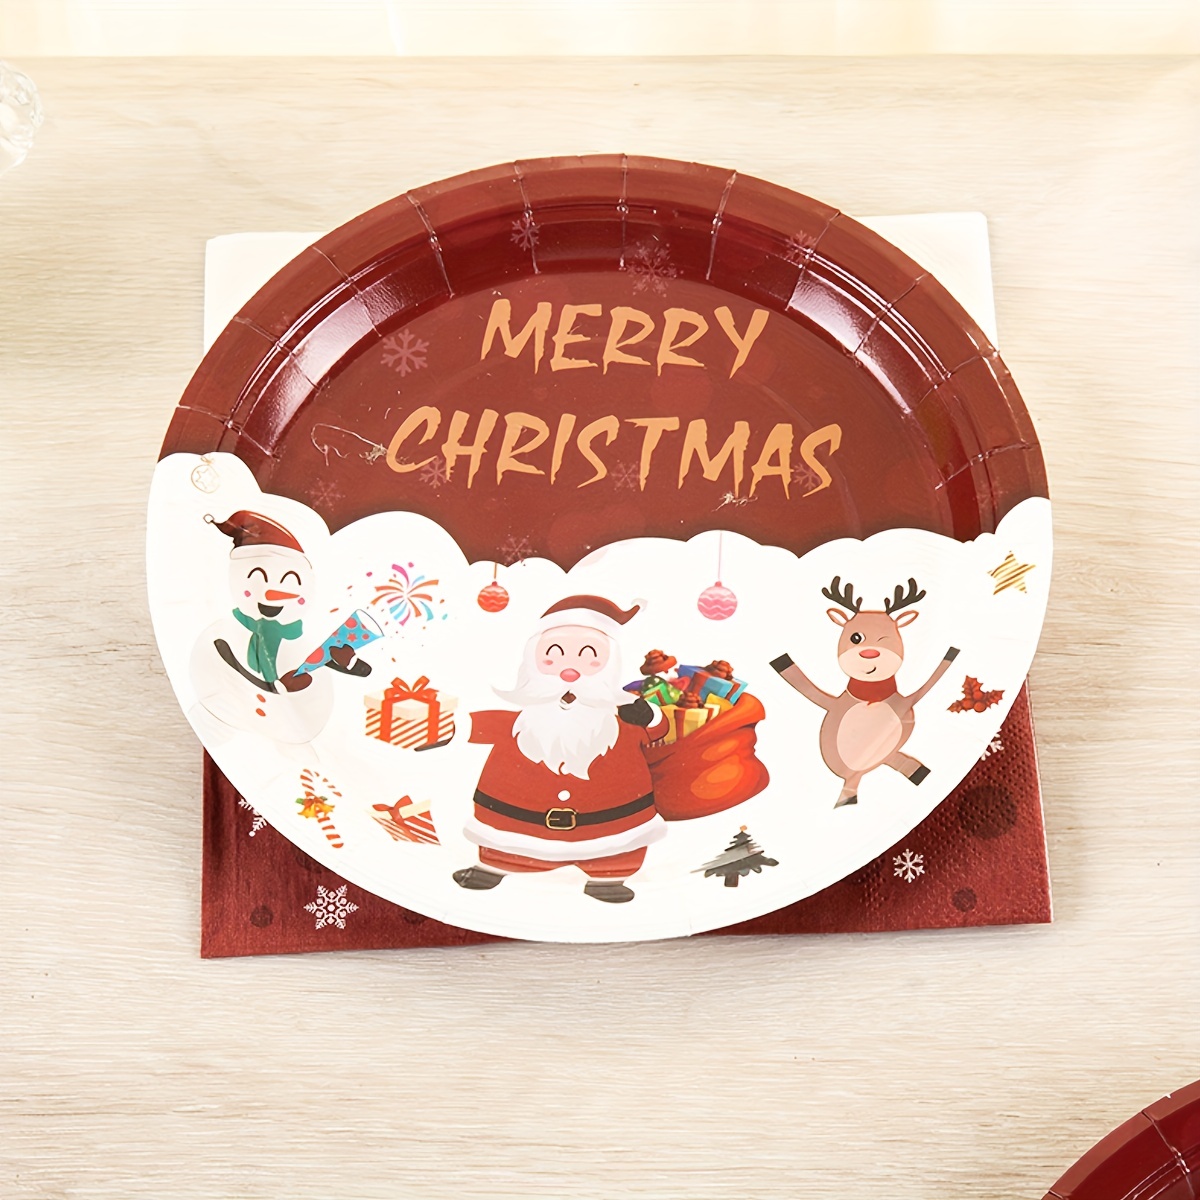 25pcs Christmas Themed Disposable Paper Plates With Santa Claus